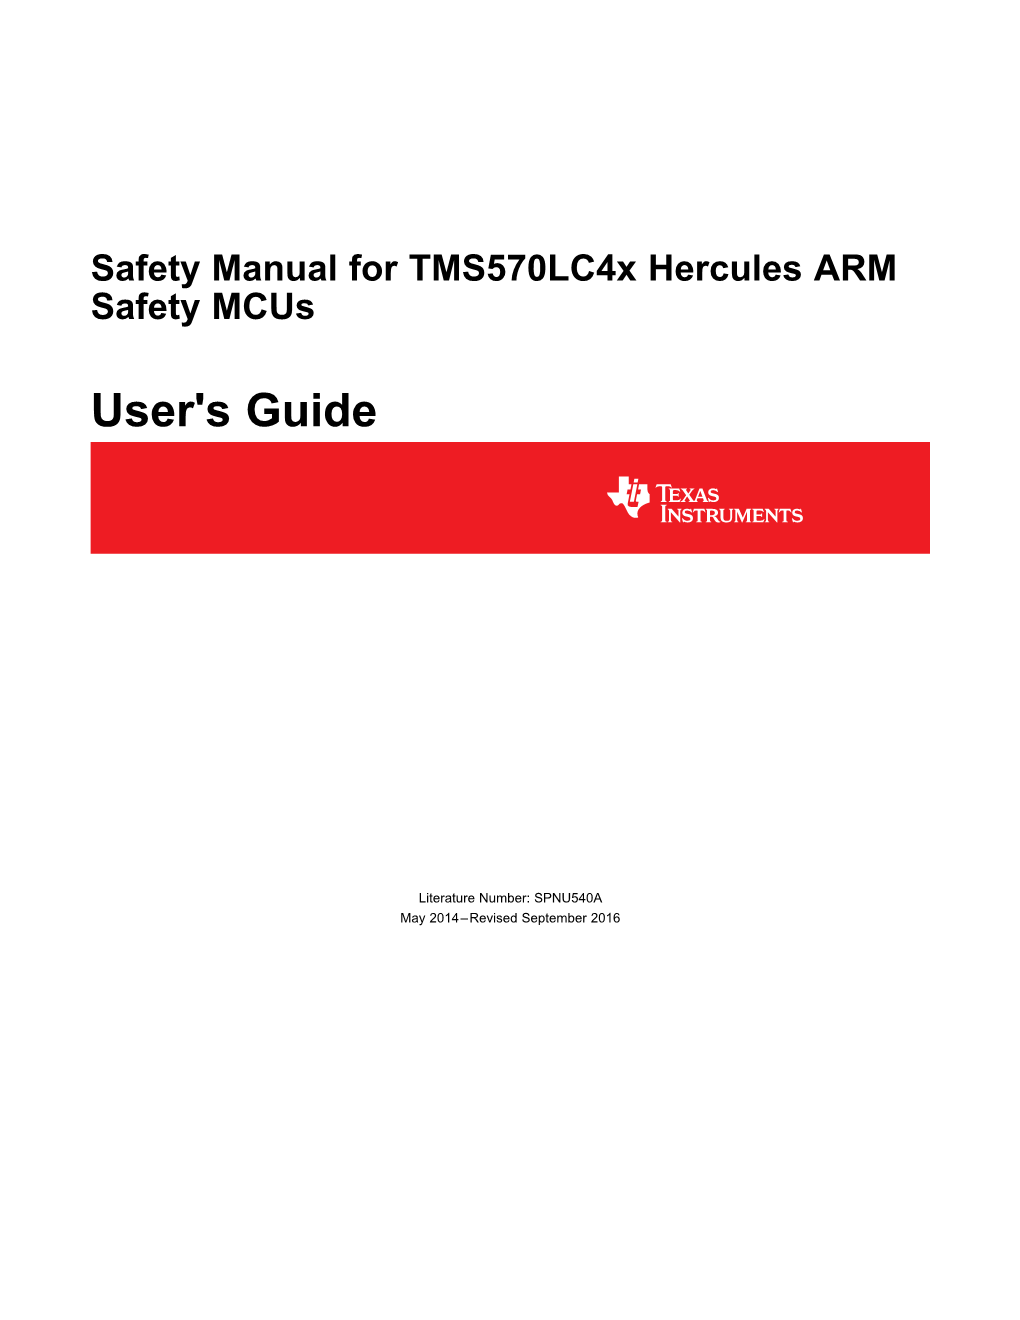 Safety Manual for Tms570lc4x Hercules ARM Safety Mcus